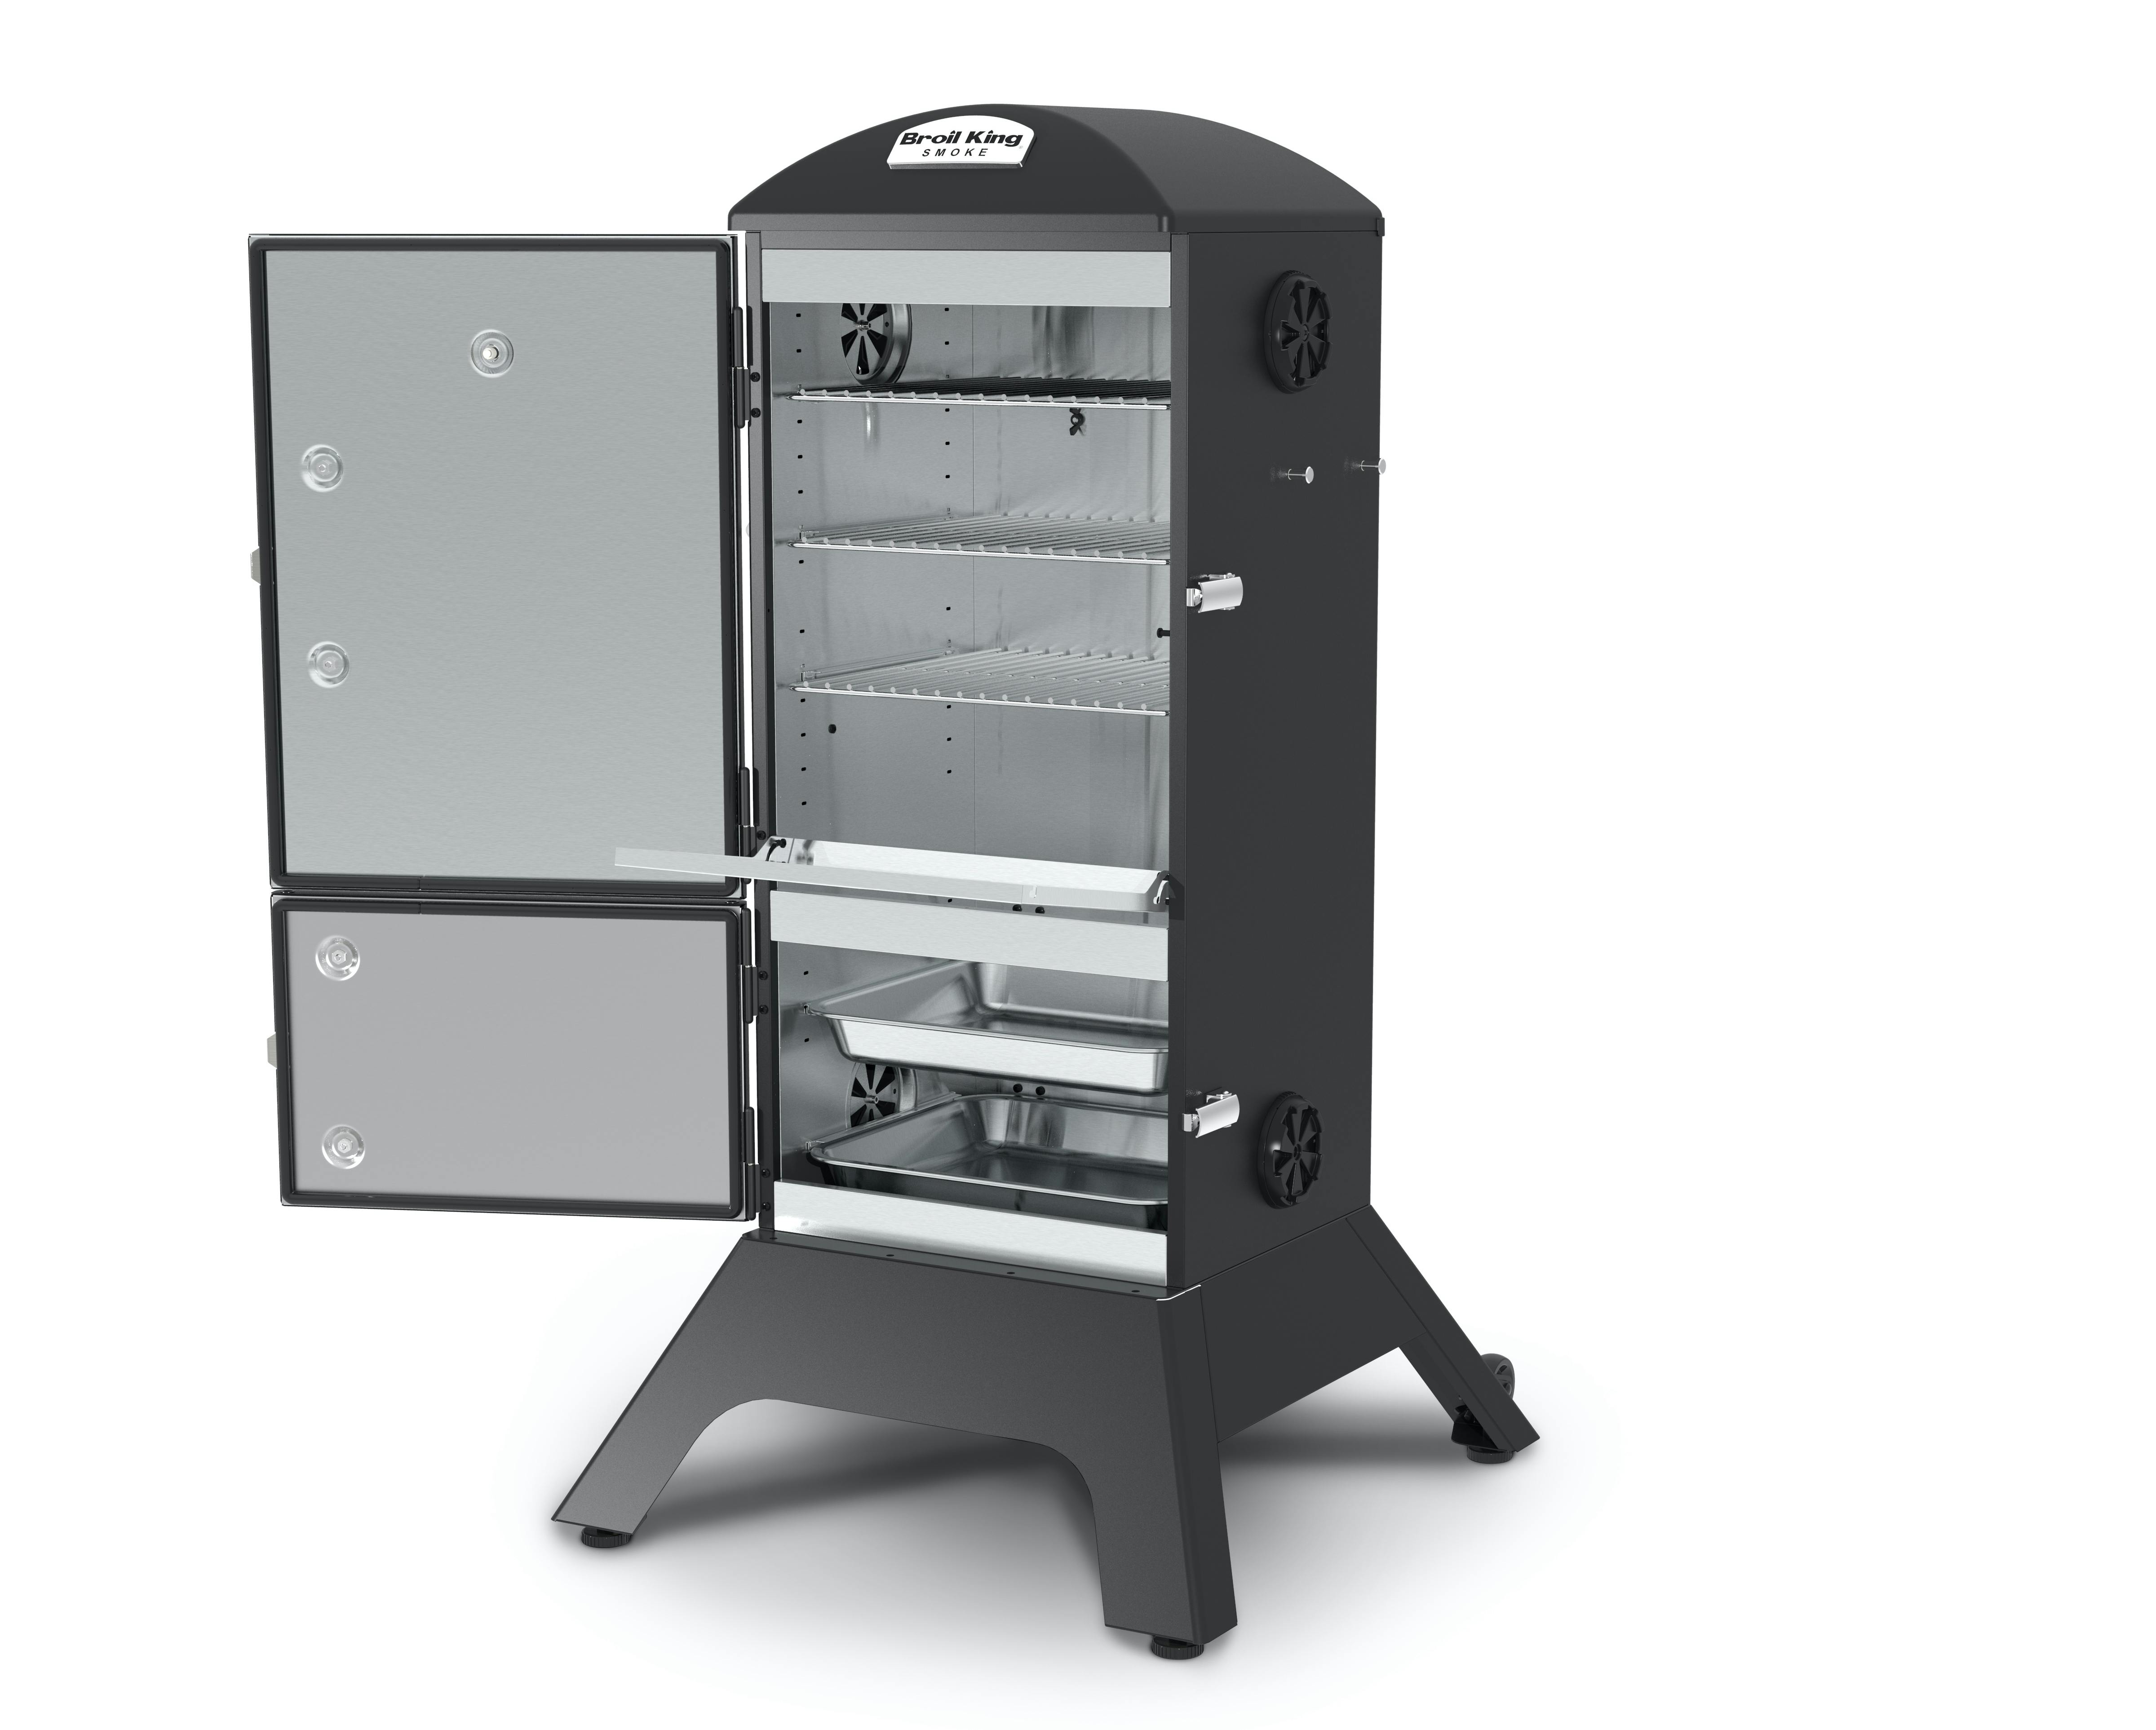 Product image of the Broil King Vertical Charcoal Smoker. 